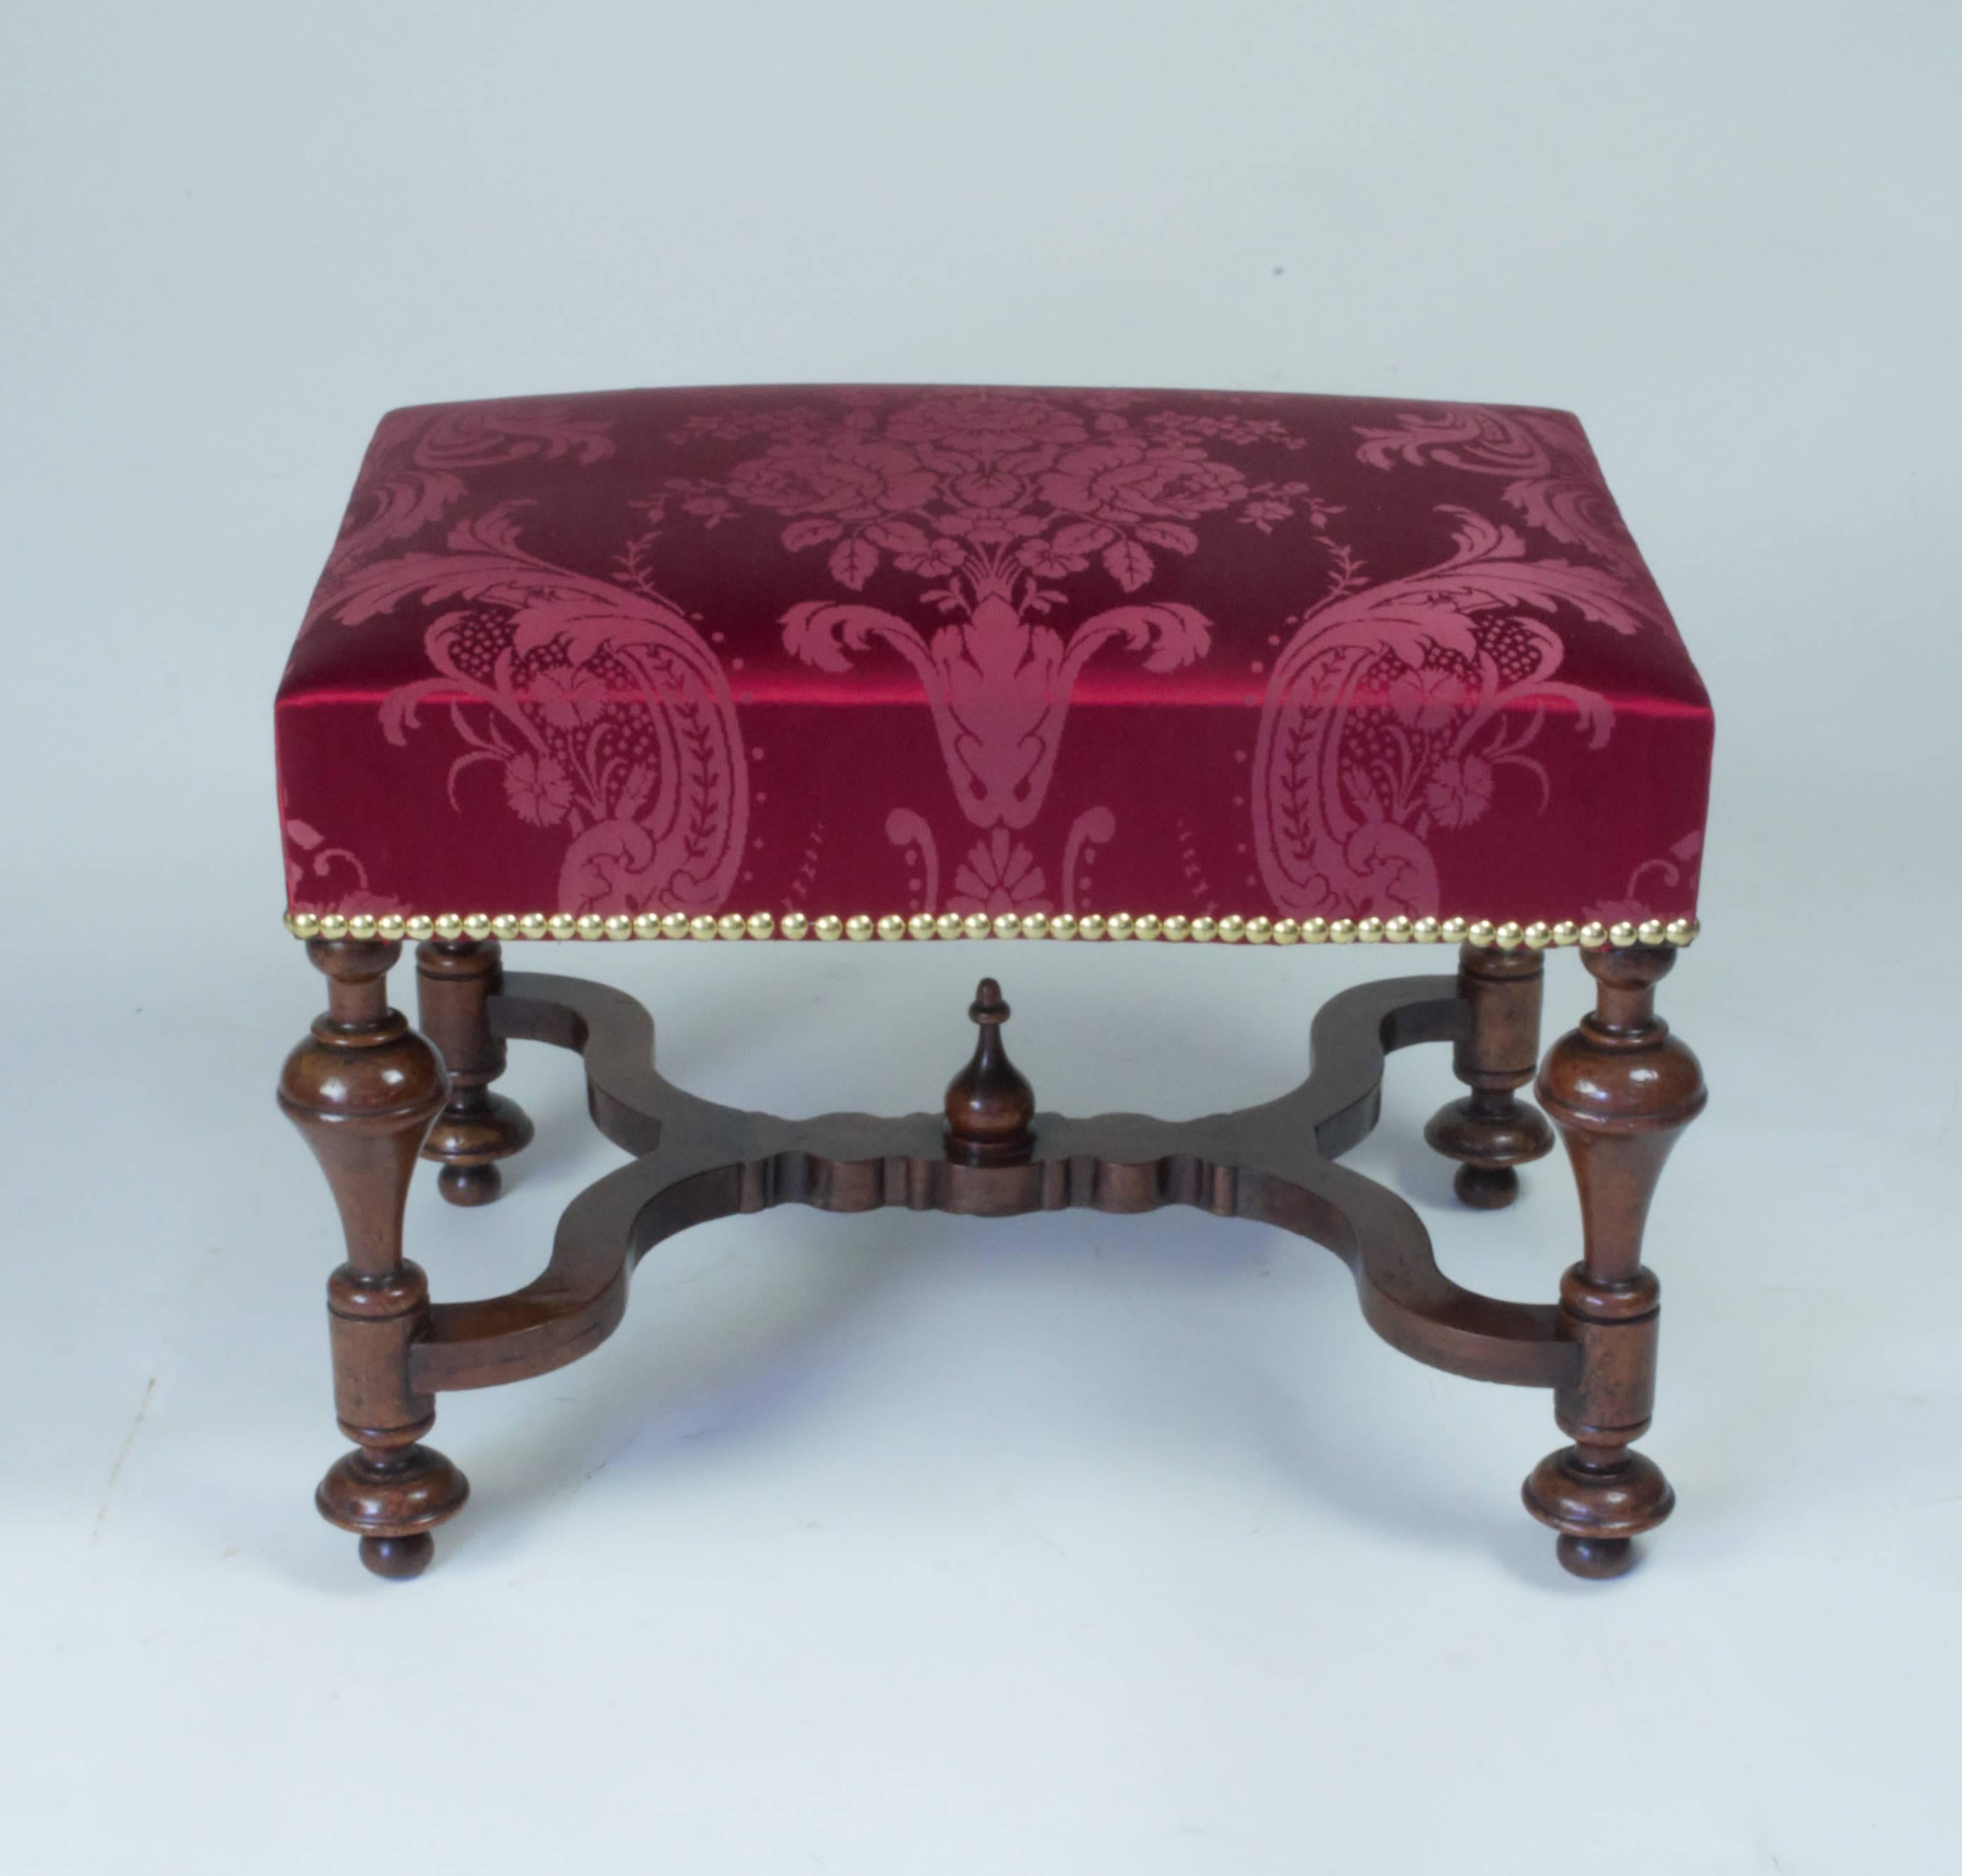 An fine and rare William and Mary period walnut stool with upholstered seat raised on turned 'cup and cover legs joined by shaped crossed stretchers with a central finial. Good color and patina.